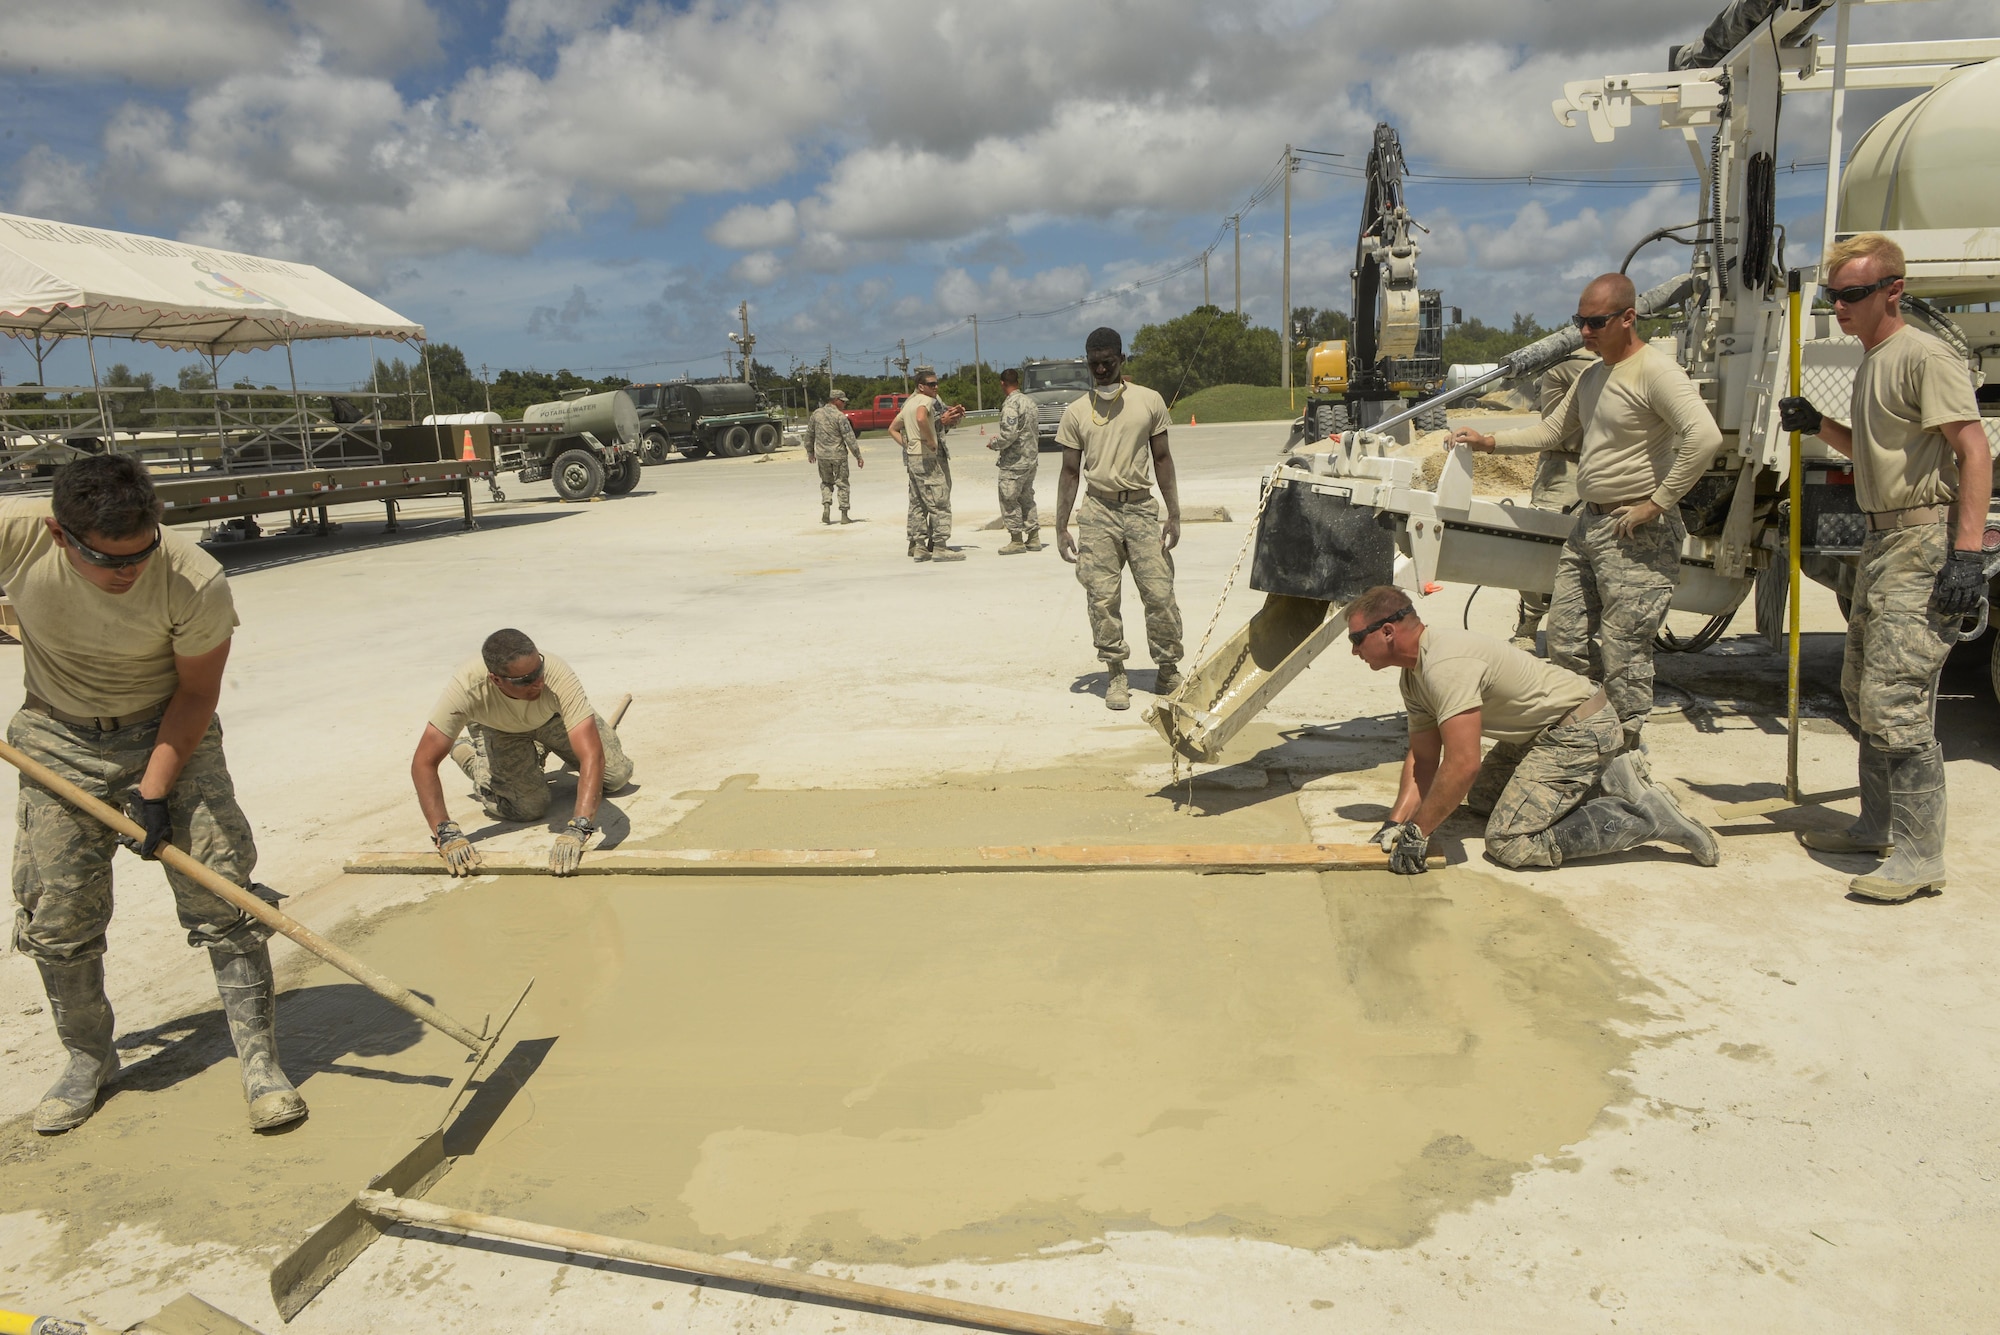 A joint team of U.S. Air Force Airmen from the Kadena, Yakota and Misawa civil engineer squadrons practice concrete screeding skills using the materials, equipment and methods to repair craters during airfield damage repair training exercise Sept, 15, 2016, at Kadena Air Base, Japan. This process can be done quickly in combat situations so airfield operations can resume. (U.S. Air Force photo by Senior Airman Stephen G. Eigel)